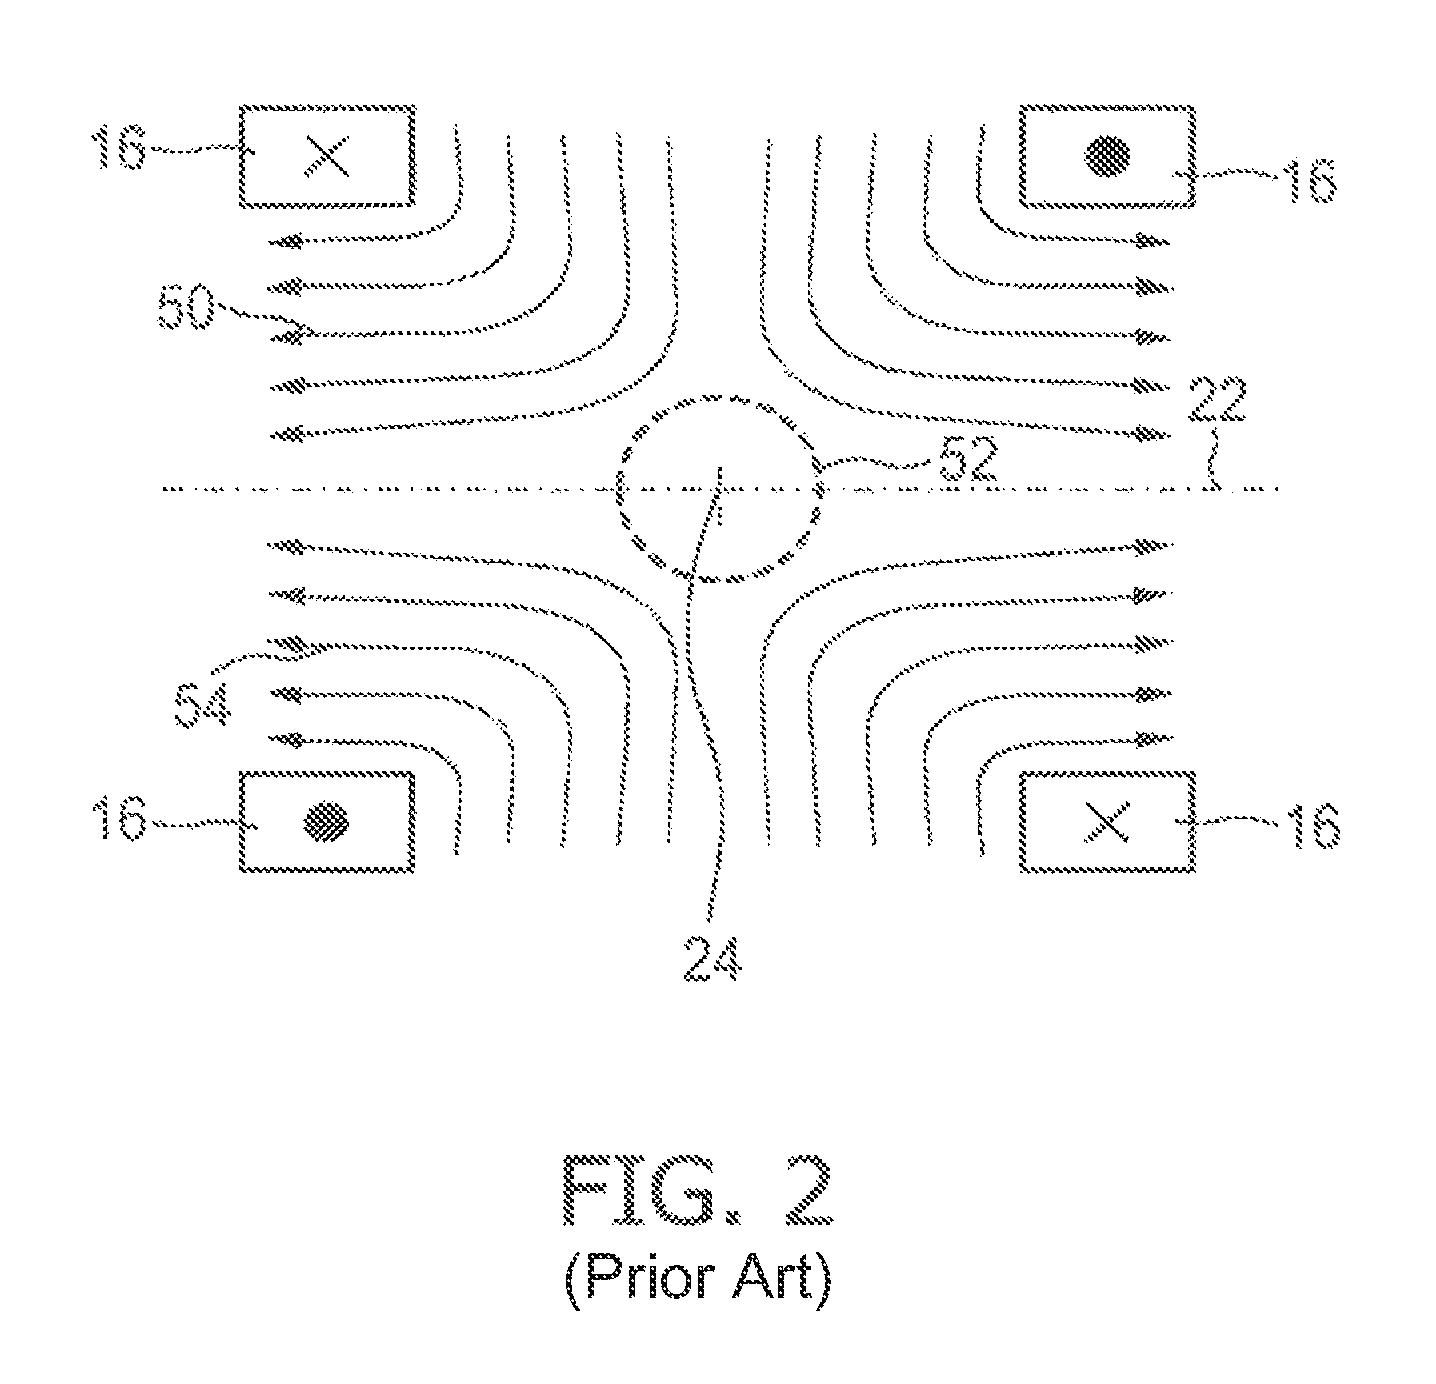 Apparatus and method for influencing and/or detecting magnetic particles in a field of view having an array of single-sided transmit coil sets